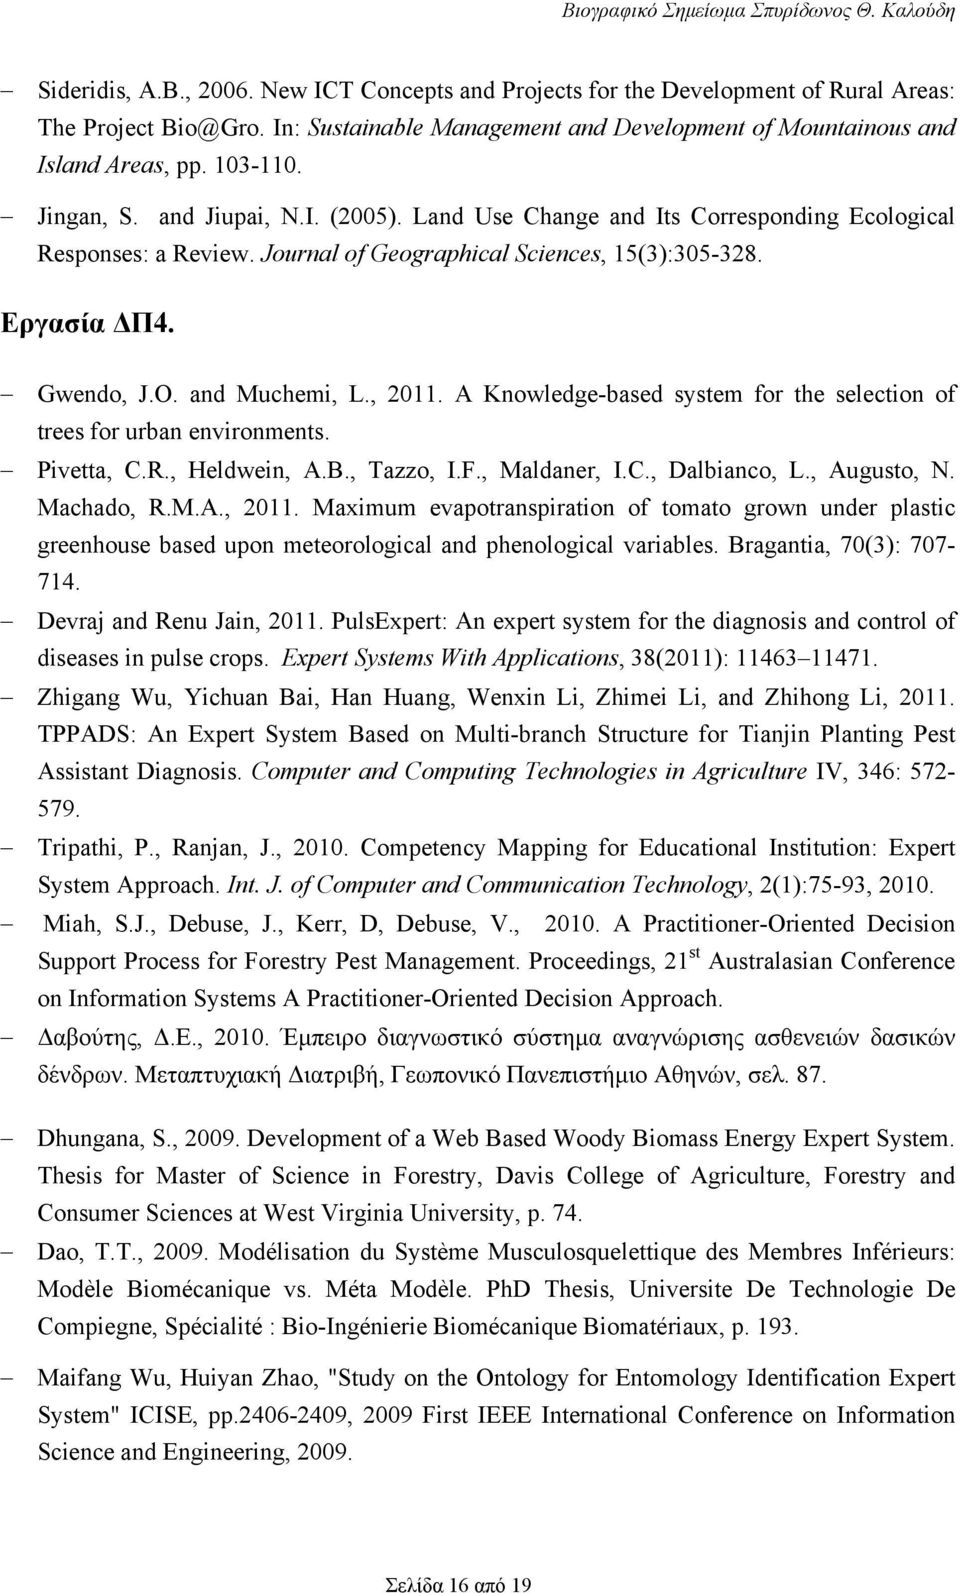 , 2011. A Knowledge-based system for the selection of trees for urban environments. Pivetta, C.R., Heldwein, A.B., Tazzo, I.F., Maldaner, I.C., Dalbianco, L., Augusto, N. Machado, R.M.A., 2011. Maximum evapotranspiration of tomato grown under plastic greenhouse based upon meteorological and phenological variables.